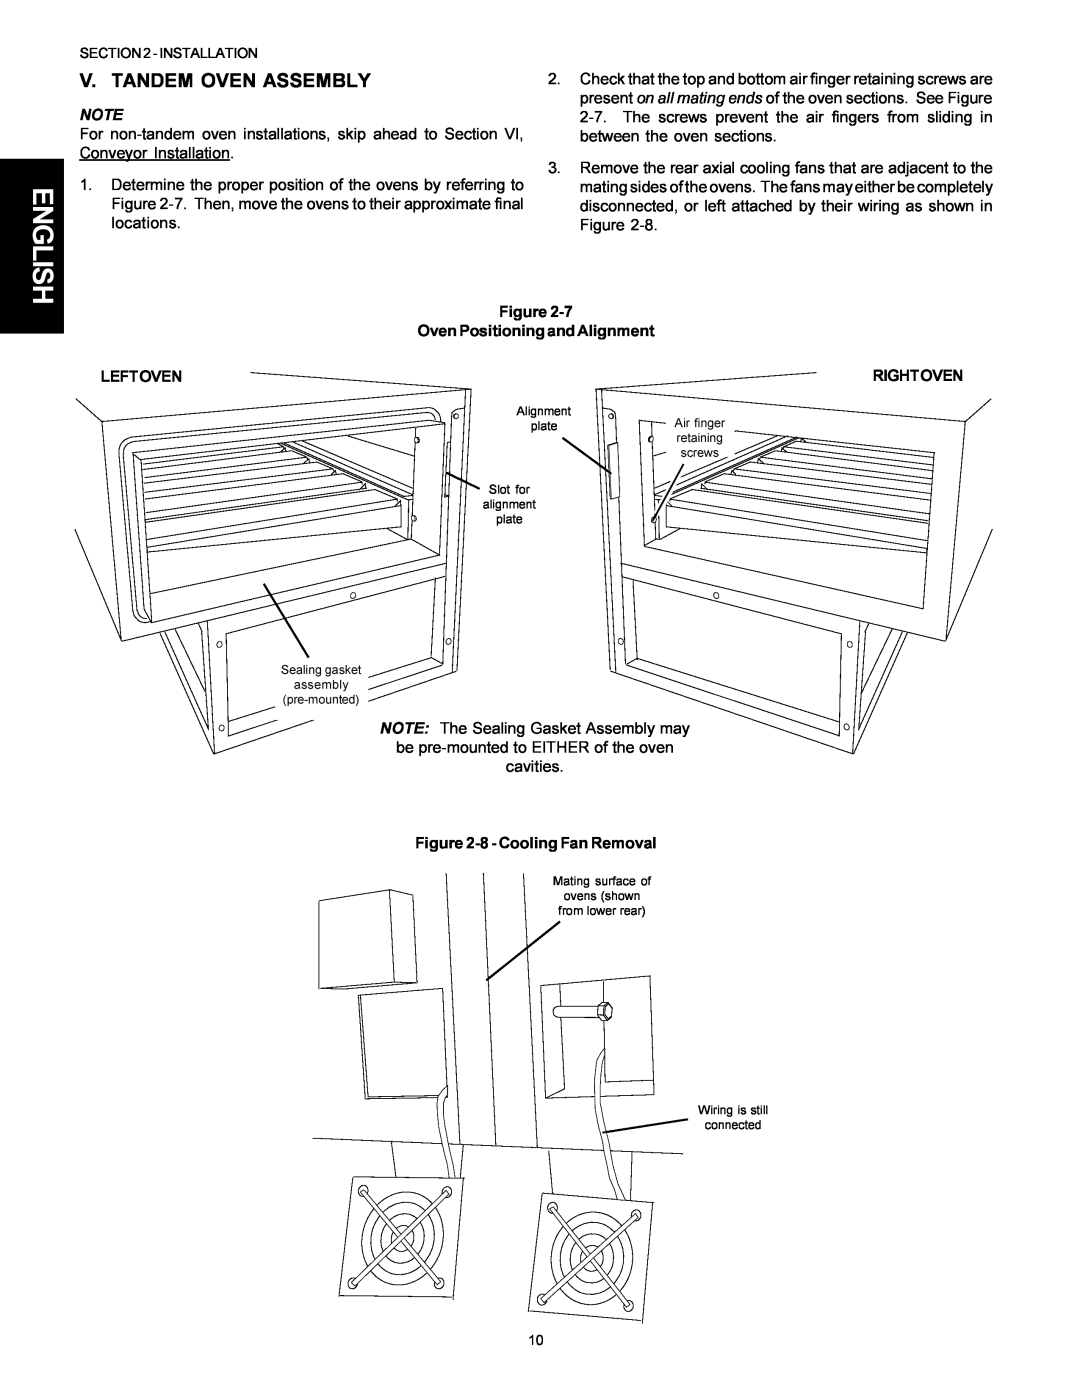 Middleby Marshall PS300F English, V. Tandem Oven Assembly, Figure Oven Positioning and Alignment, Leftoven, Rightoven 